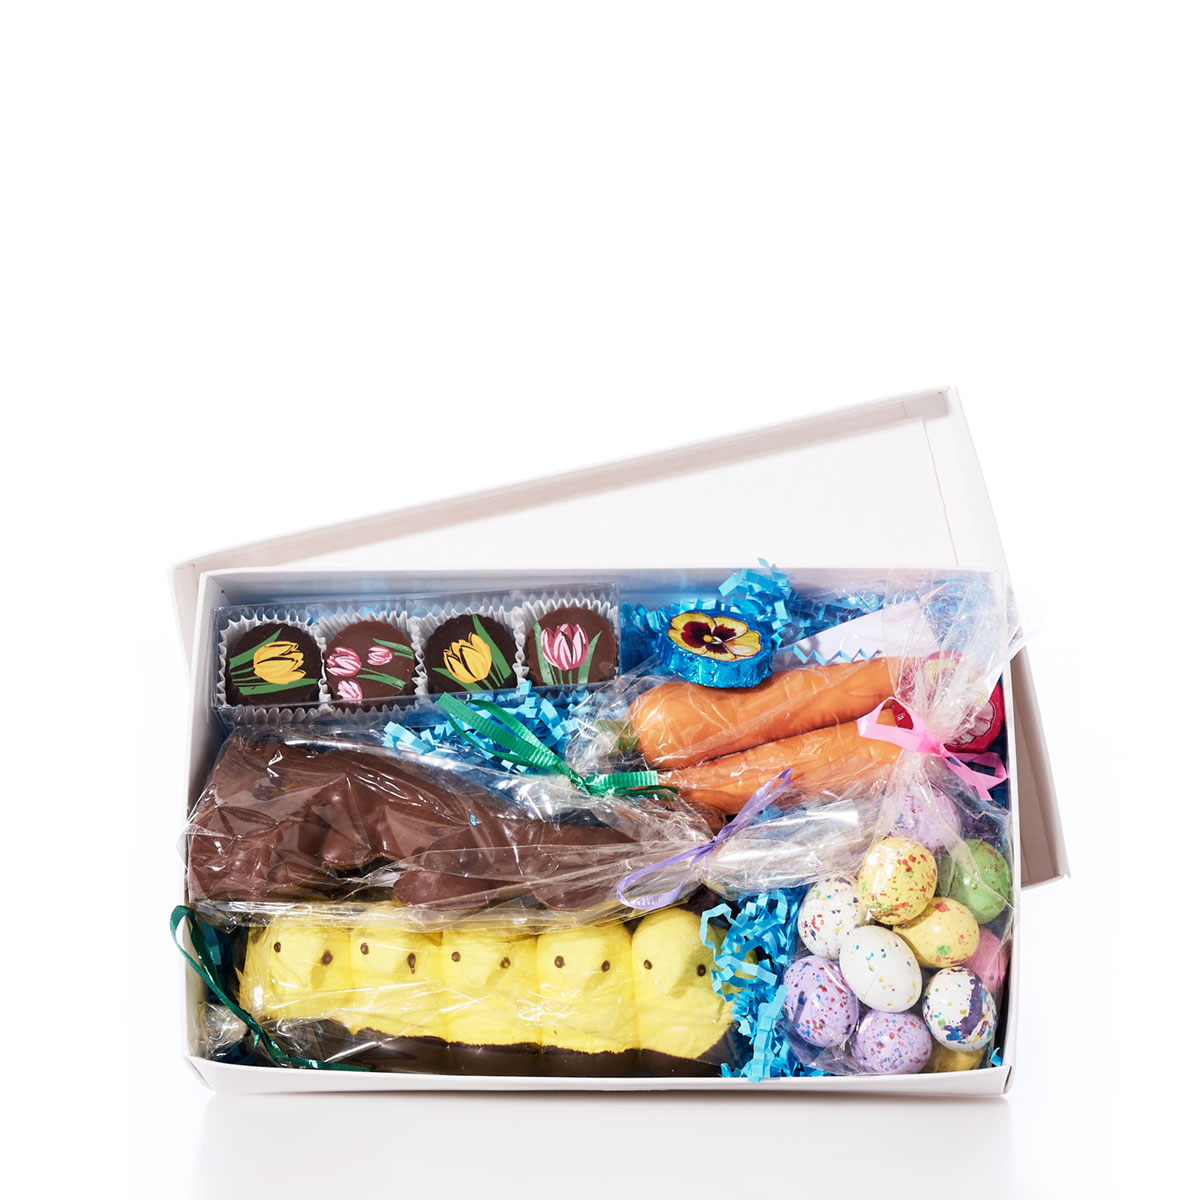 a box of Easter themed packaged chocolate and candy treats